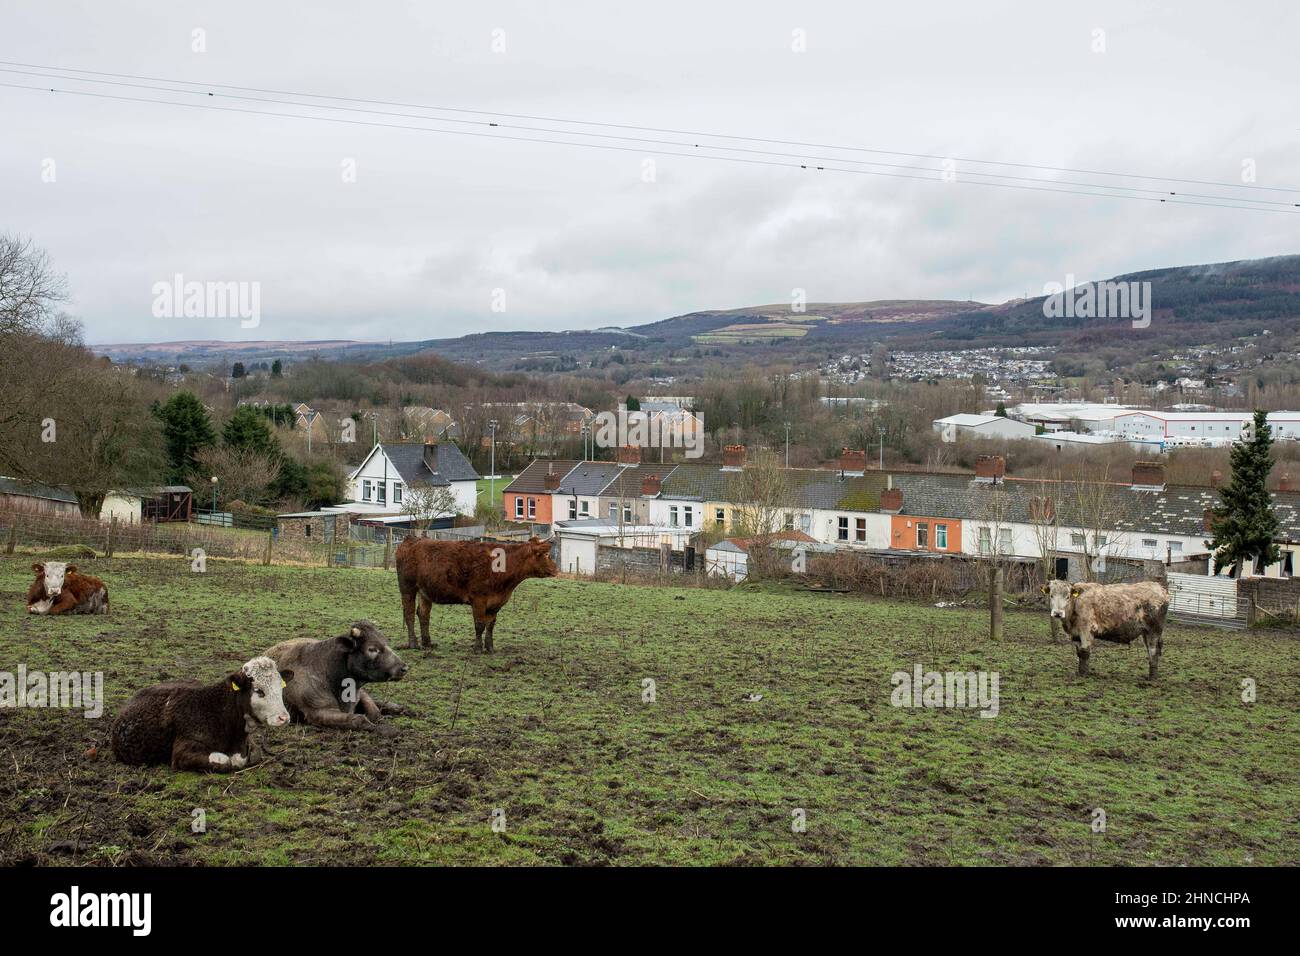 A field of unclean-looking, questionably kept cows overlooking Aberaman, Rhondda Cynon Taff, February 2022. Stock Photo